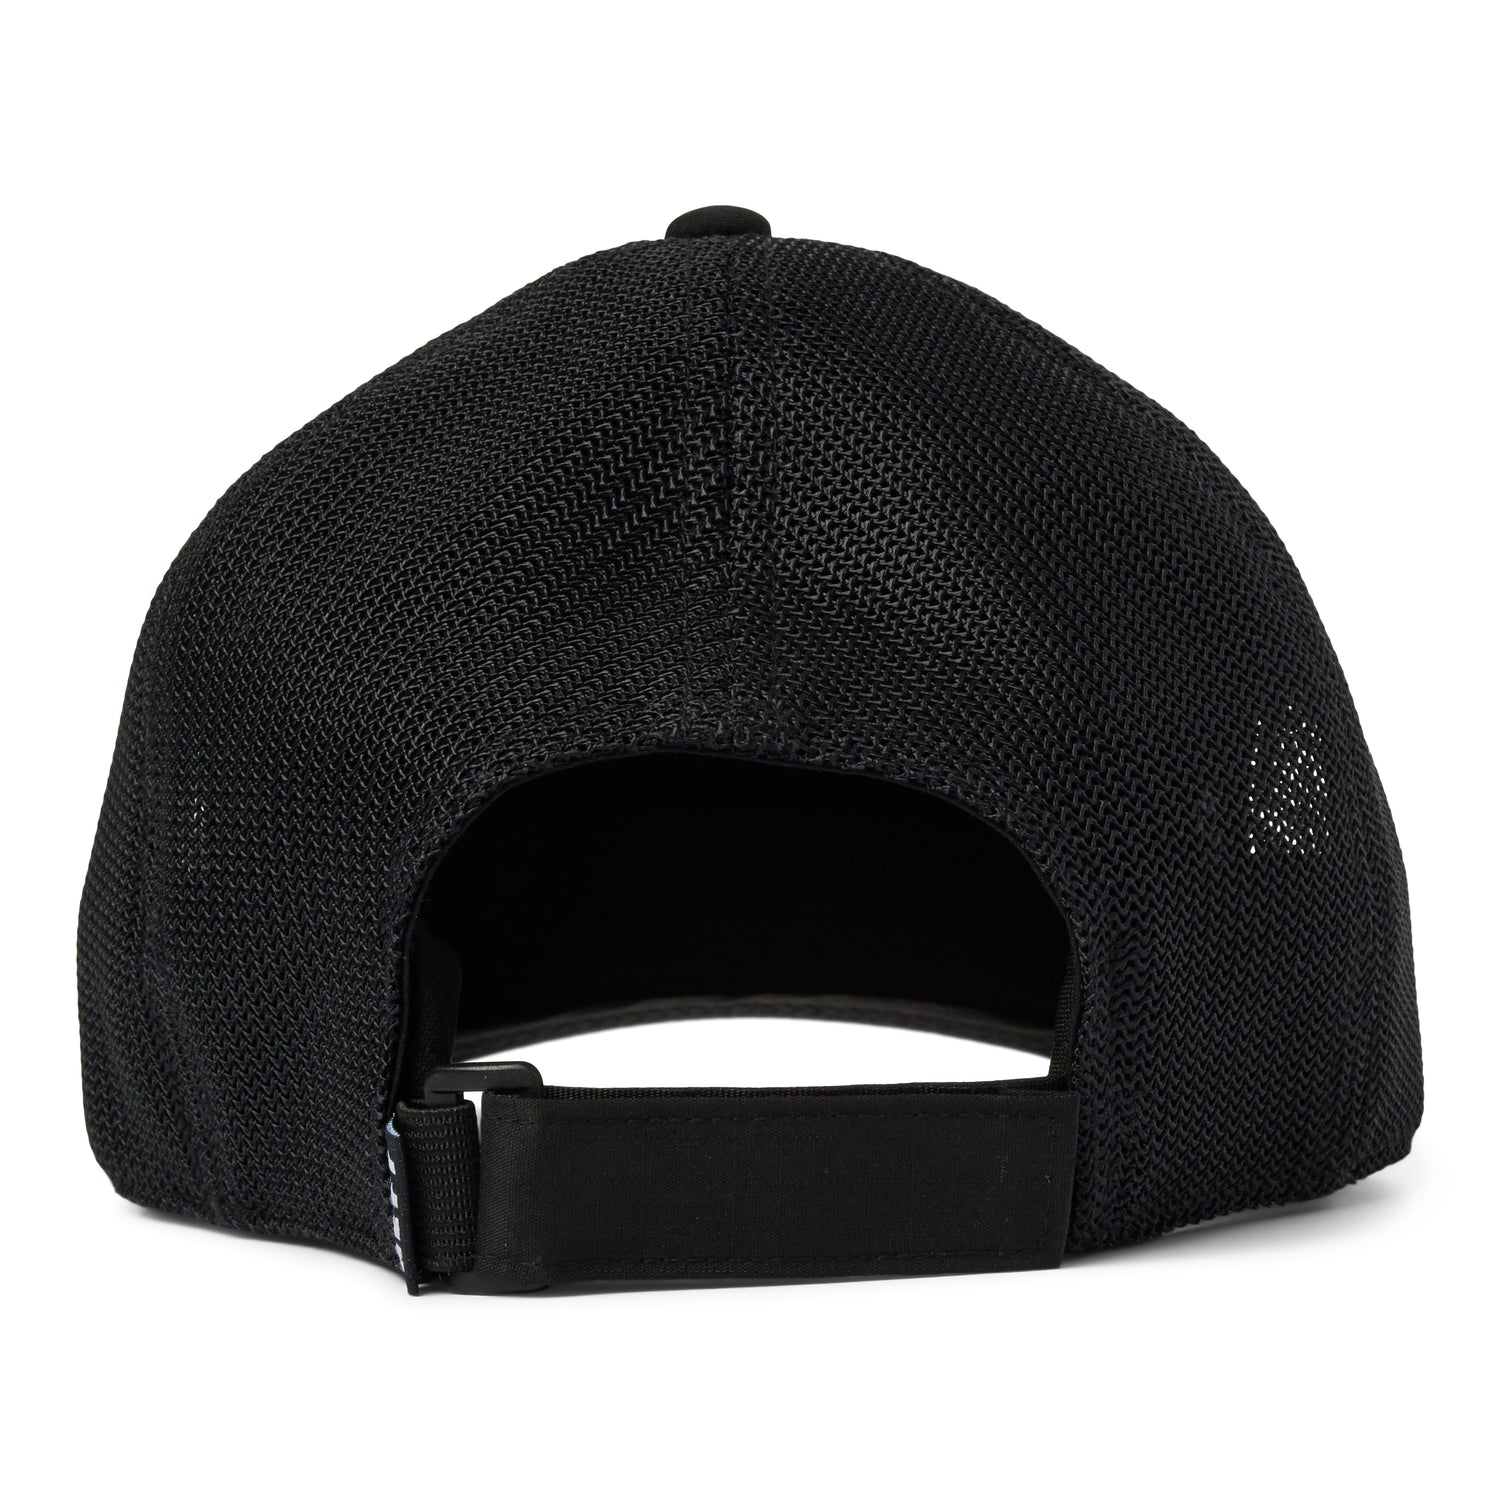 FILED PATCH HAT - BLACK